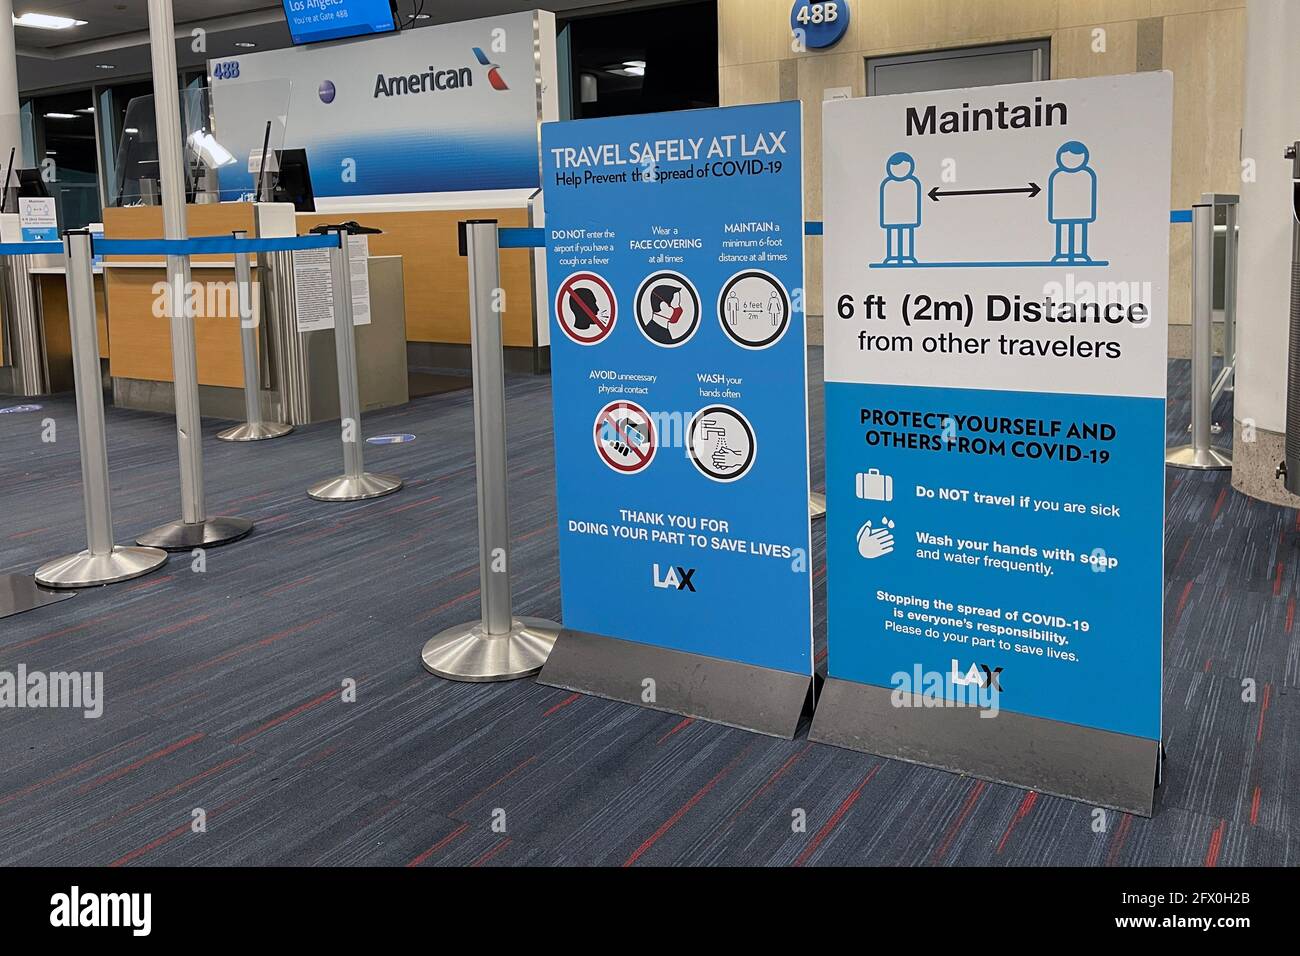 COVID-19 safety travel advisories signs at Gate 48B of Terminal 4 of the Los Angeles International Airport, Tuesday, May 24, 2021, in Los Angeles. Kir Stock Photo